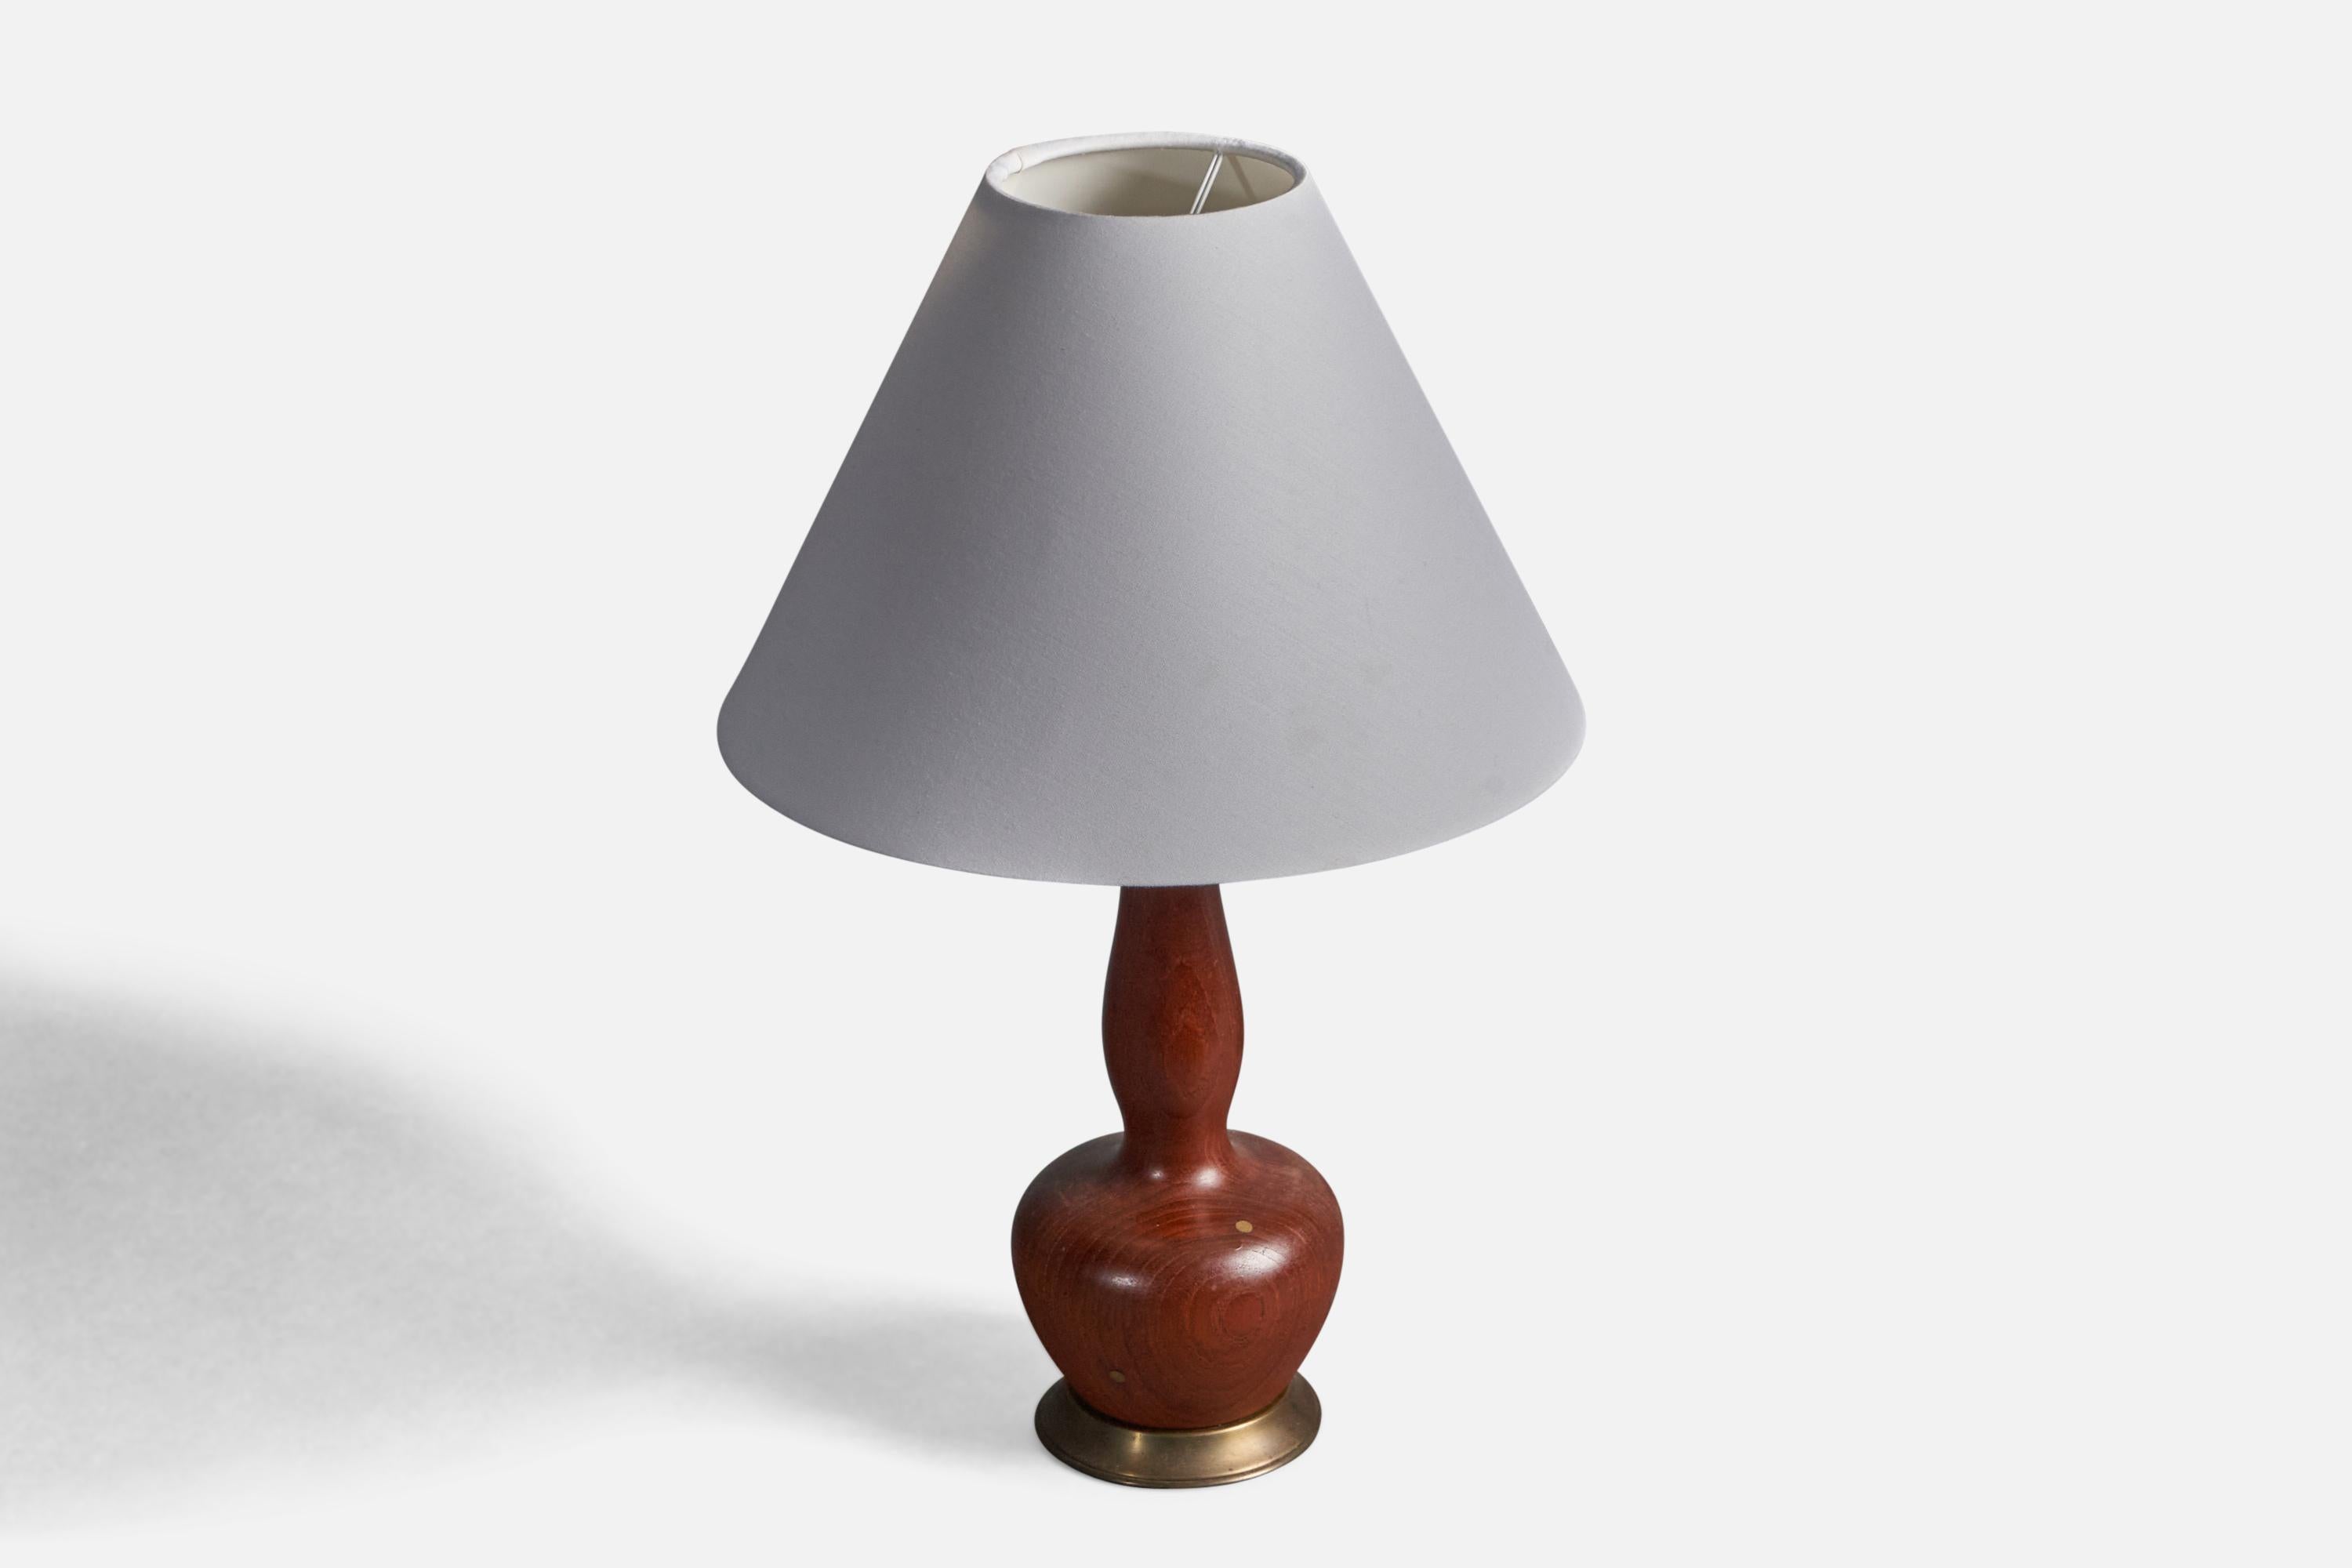 An organic table lamp. In solid teak, with superb brass inlays adding further appeal. 

Stated dimensions exclude lampshade. Height includes socket. Sold without lampshade.

Other designers of the period include Finn Juhl, Hans Wegner, Kaare Klint,